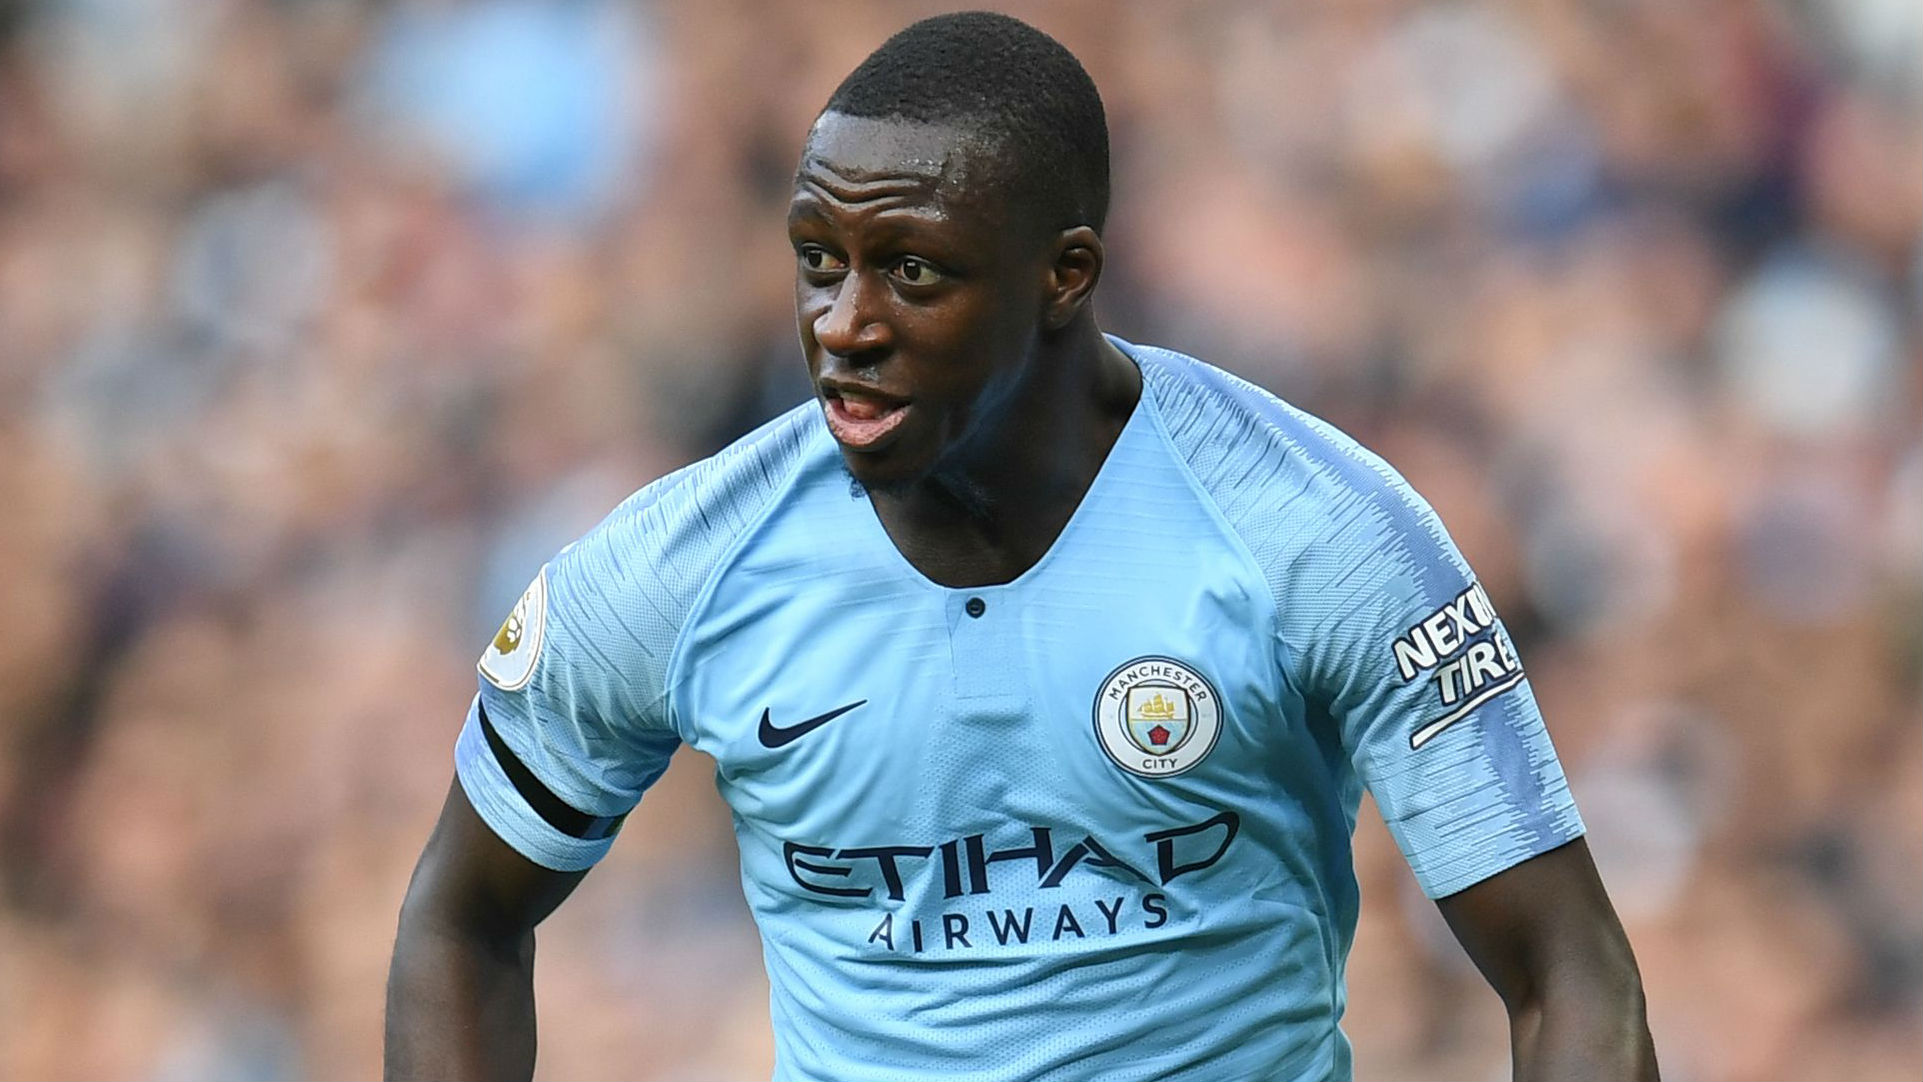 Manchester City’s Benjamin Mendy has operation on injured knee